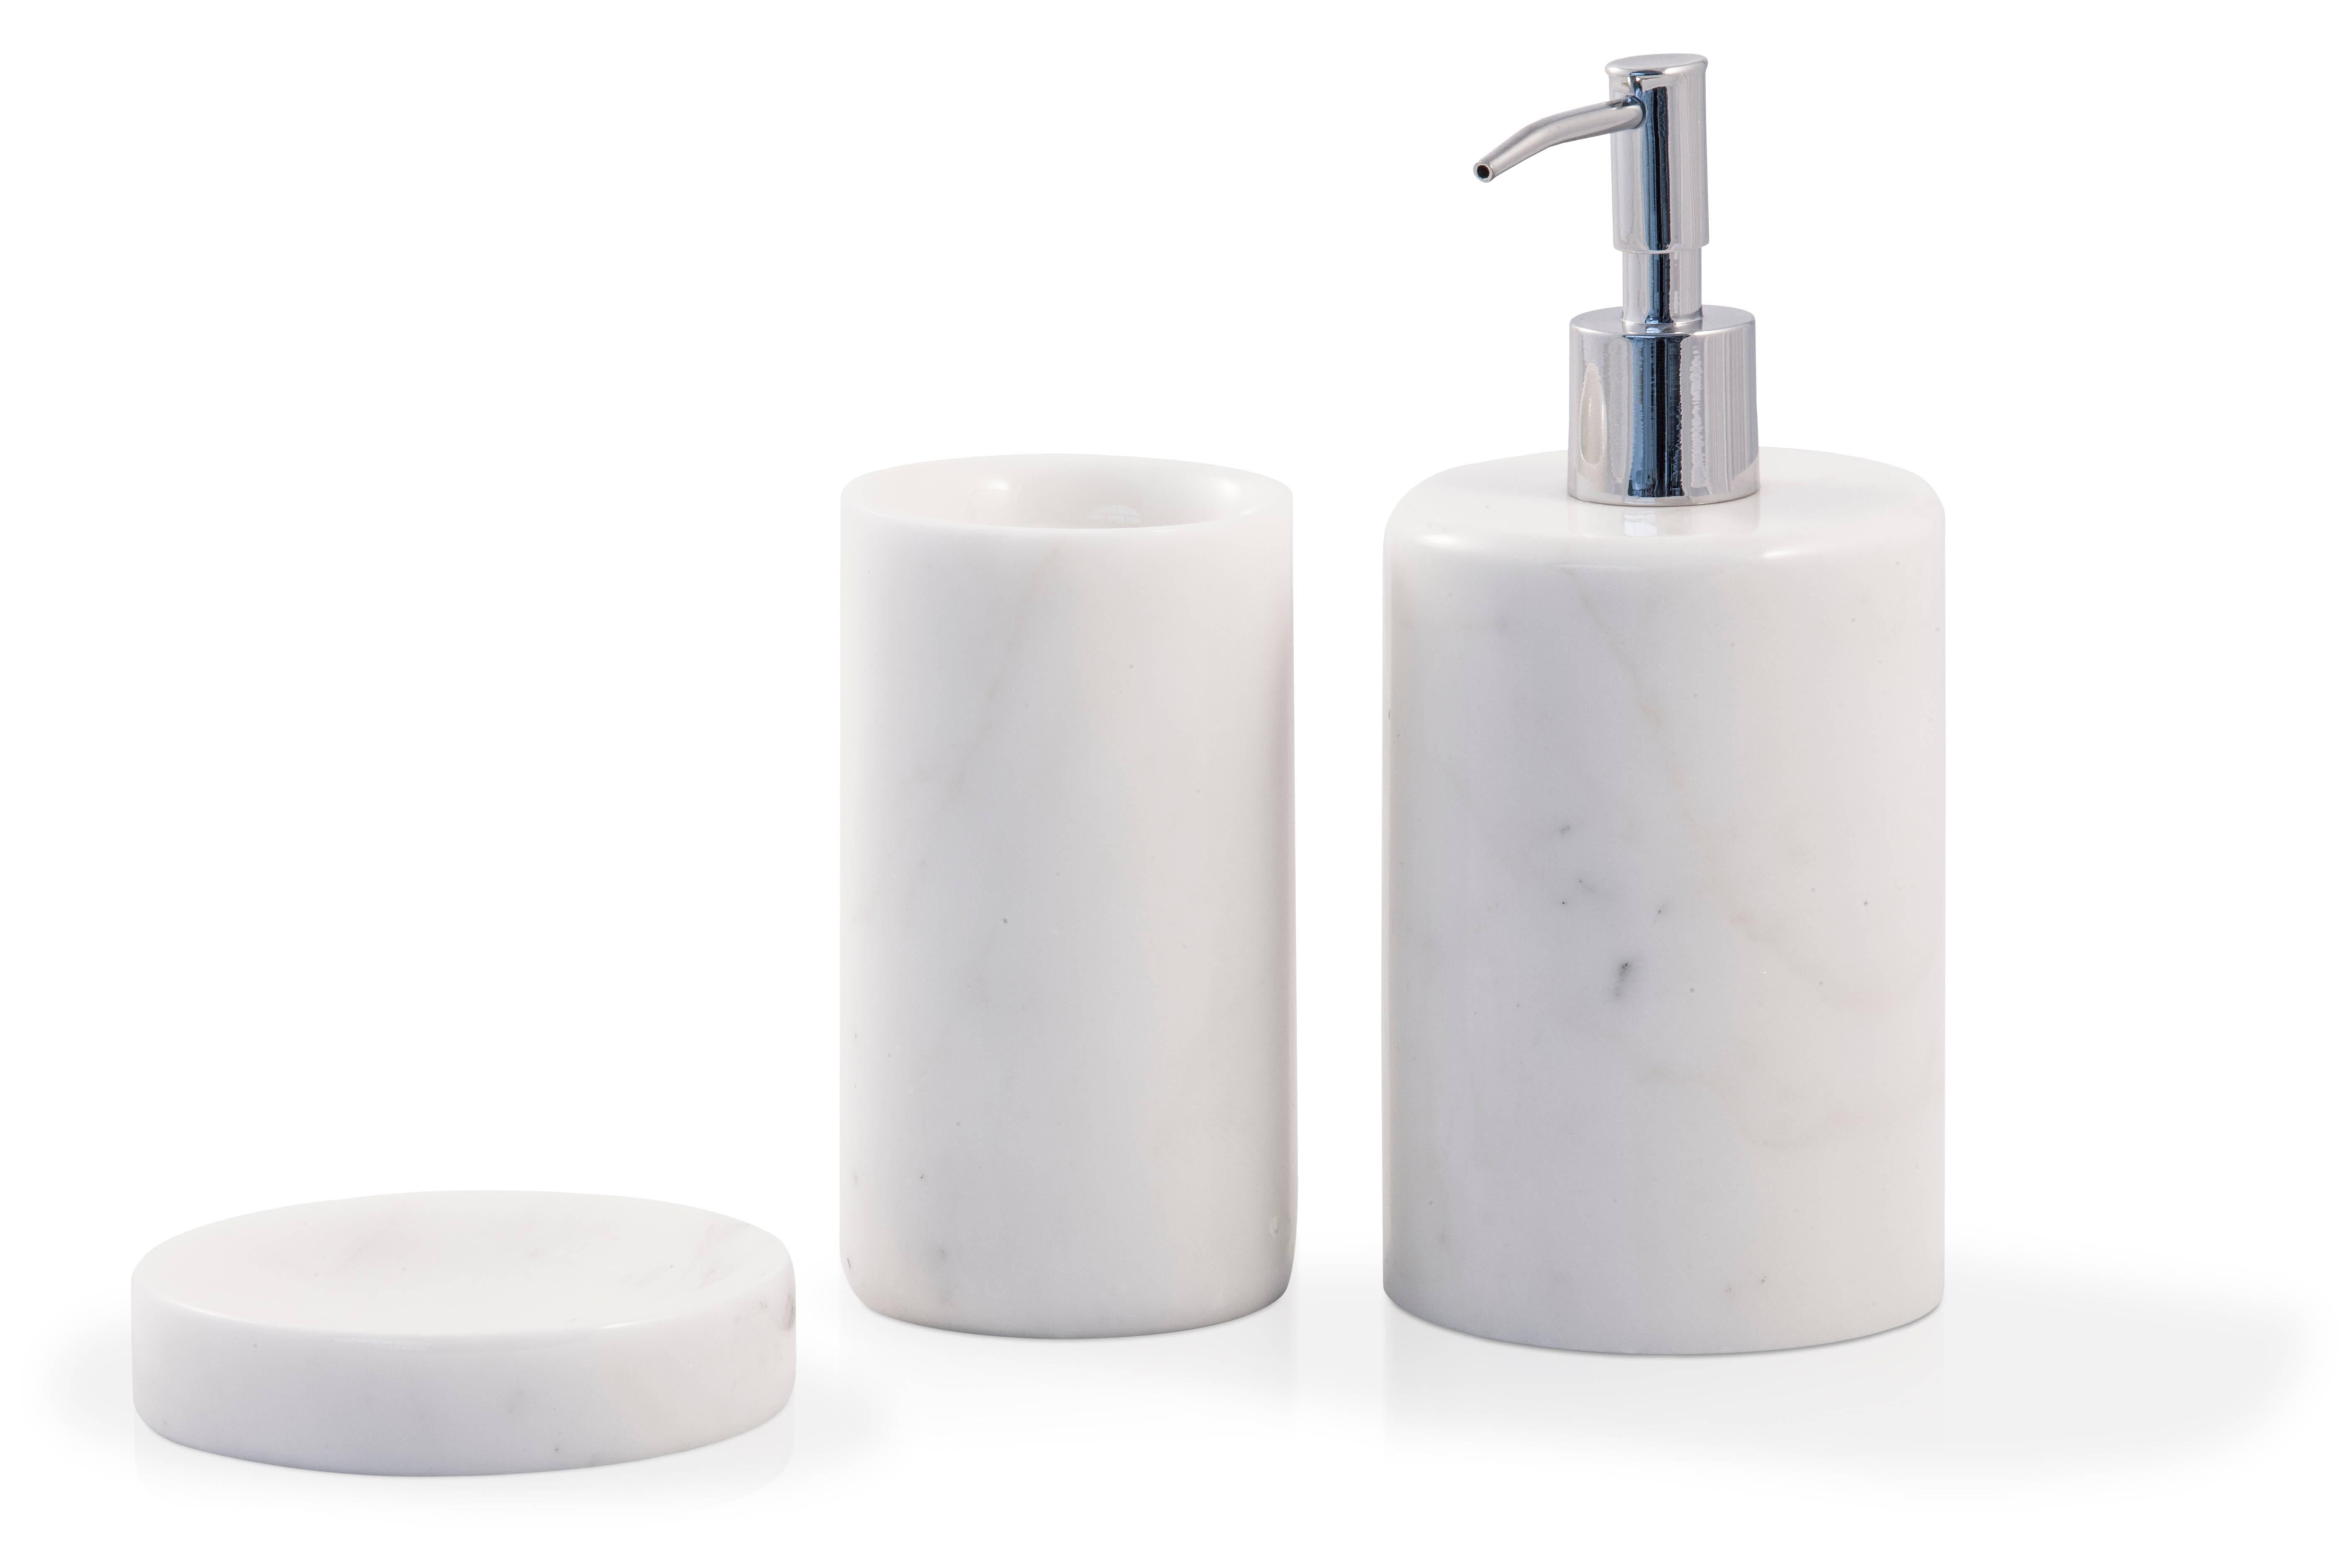 A rounded shape toothbrush holder in white Carrara marble.
Each piece is in a way unique (since each marble block is different in veins and shades) and handcrafted in Italy. Slight variations in shape, color and size are to be considered a